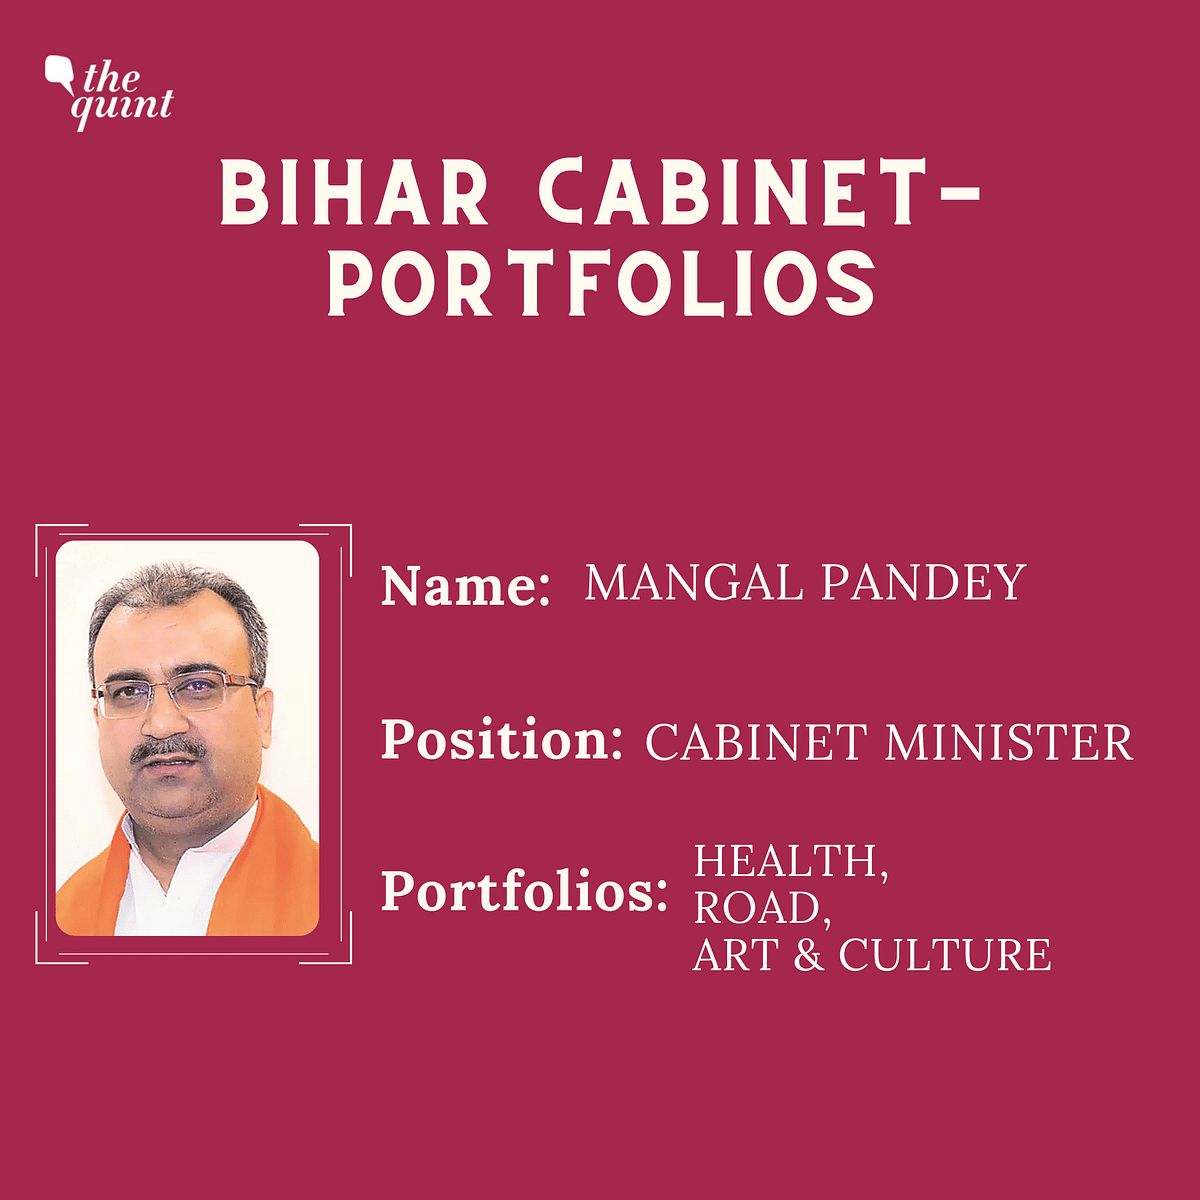 Here is the full list of which minister was handed which portfolio.